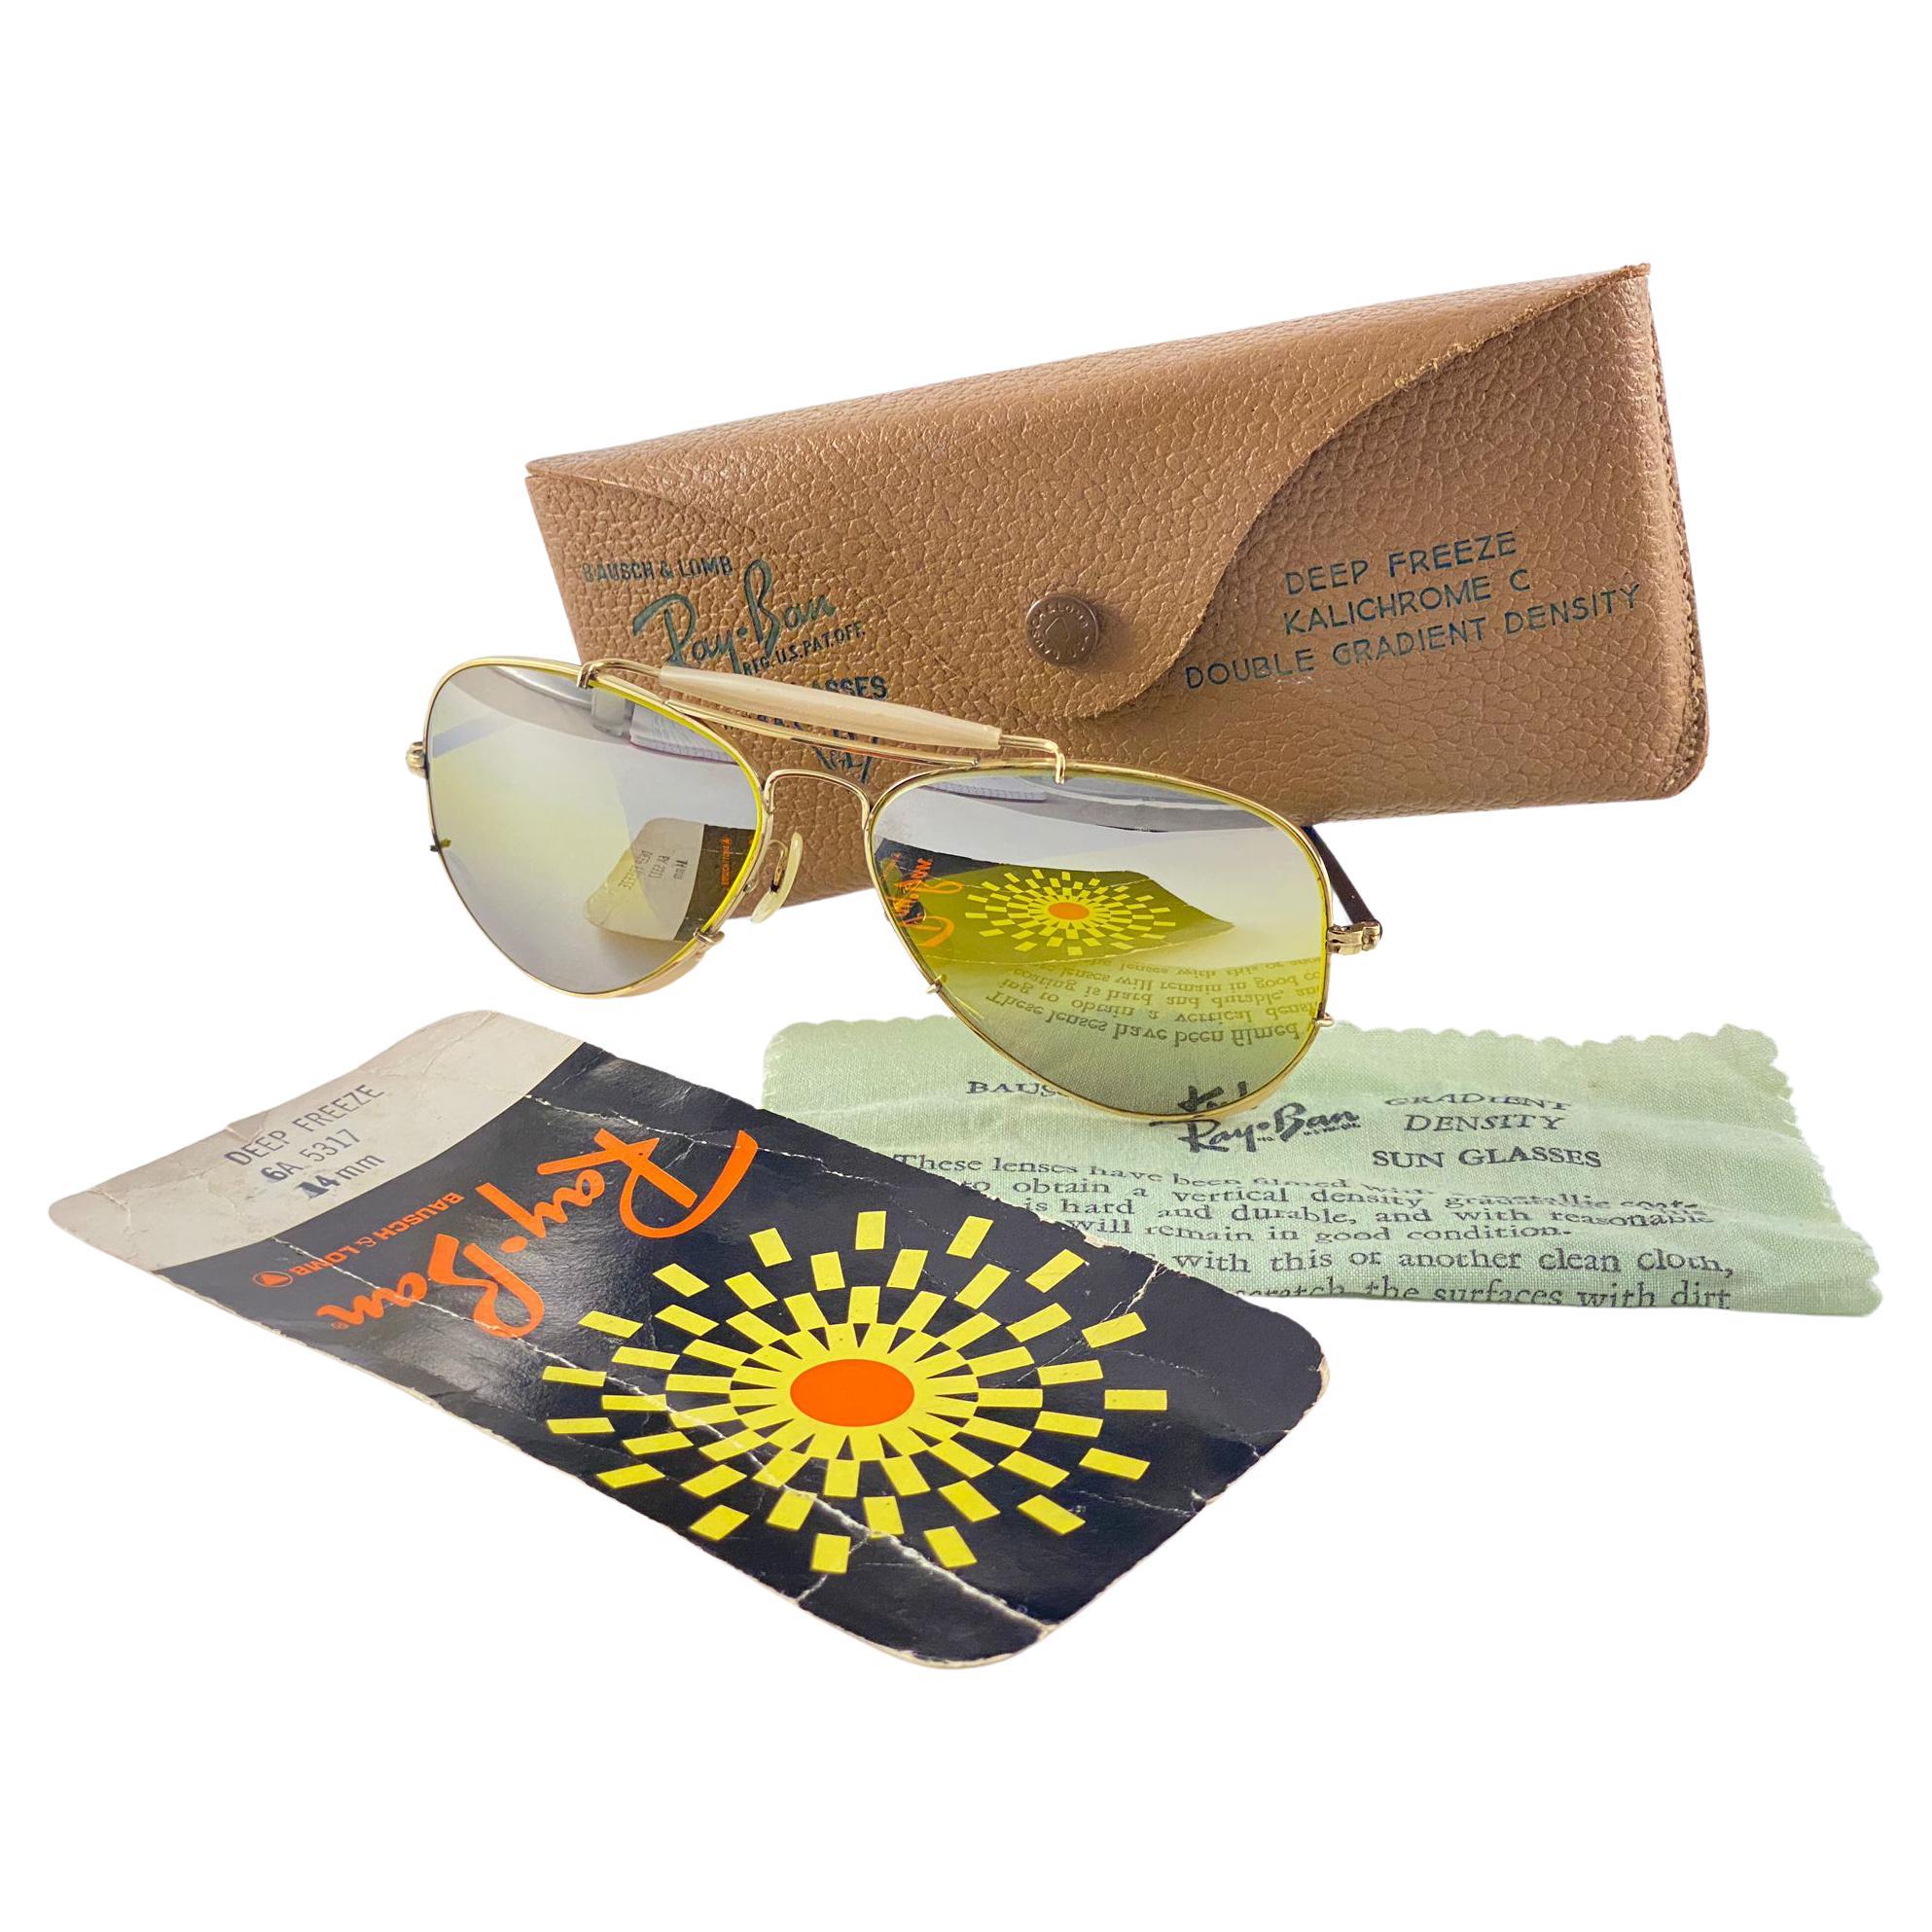 New Ray Ban Deep Freeze 12K Gold Kalichrome Collectors Item USA Sunglasses For Sale